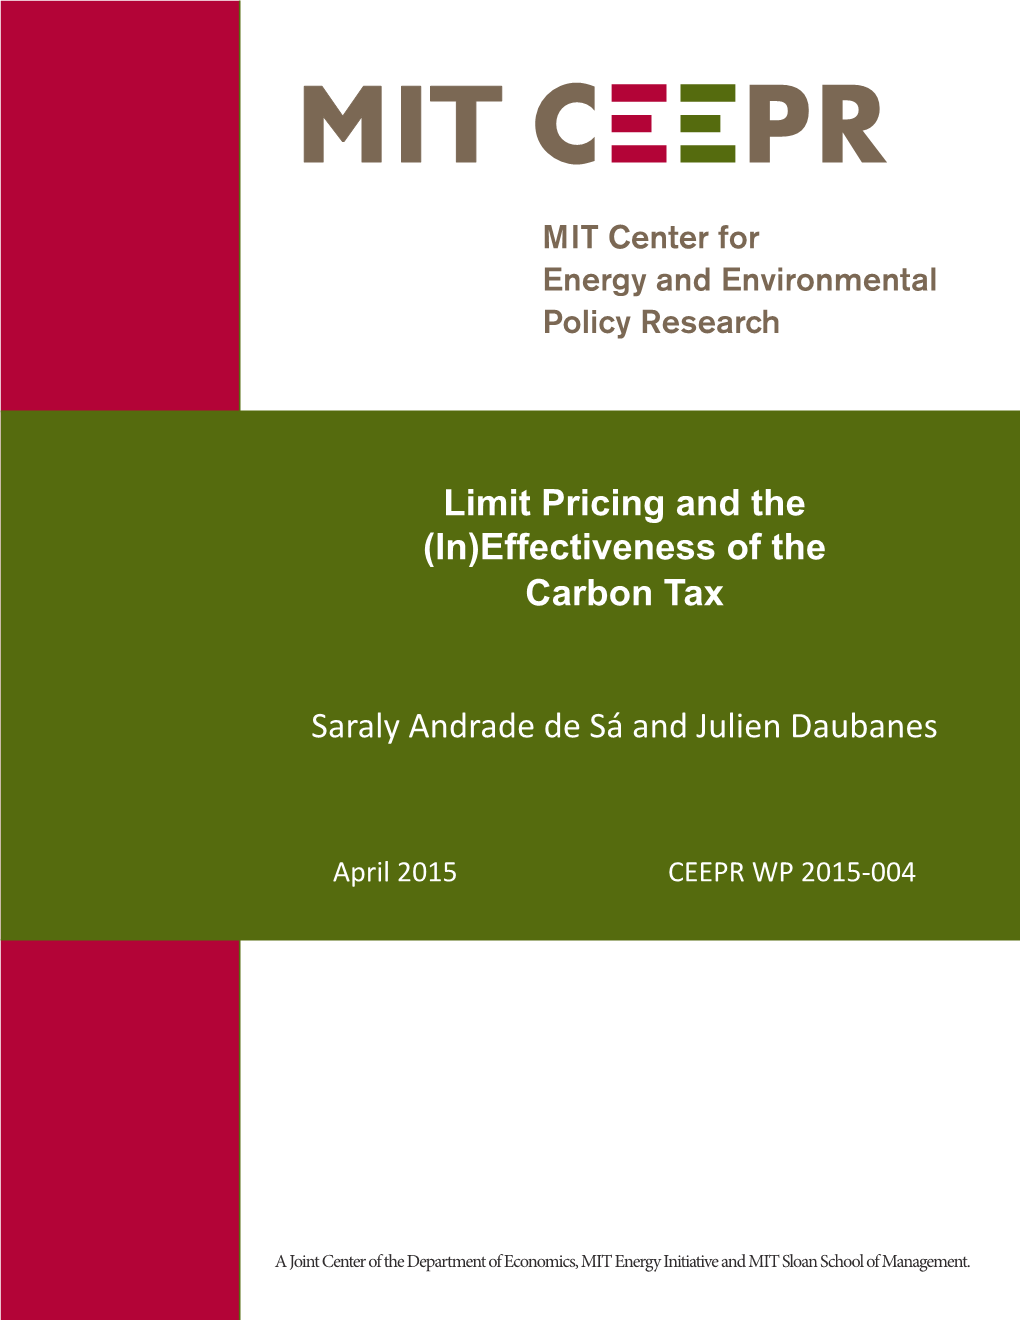 Limit Pricing and the (In)Effectiveness of the Carbon Tax